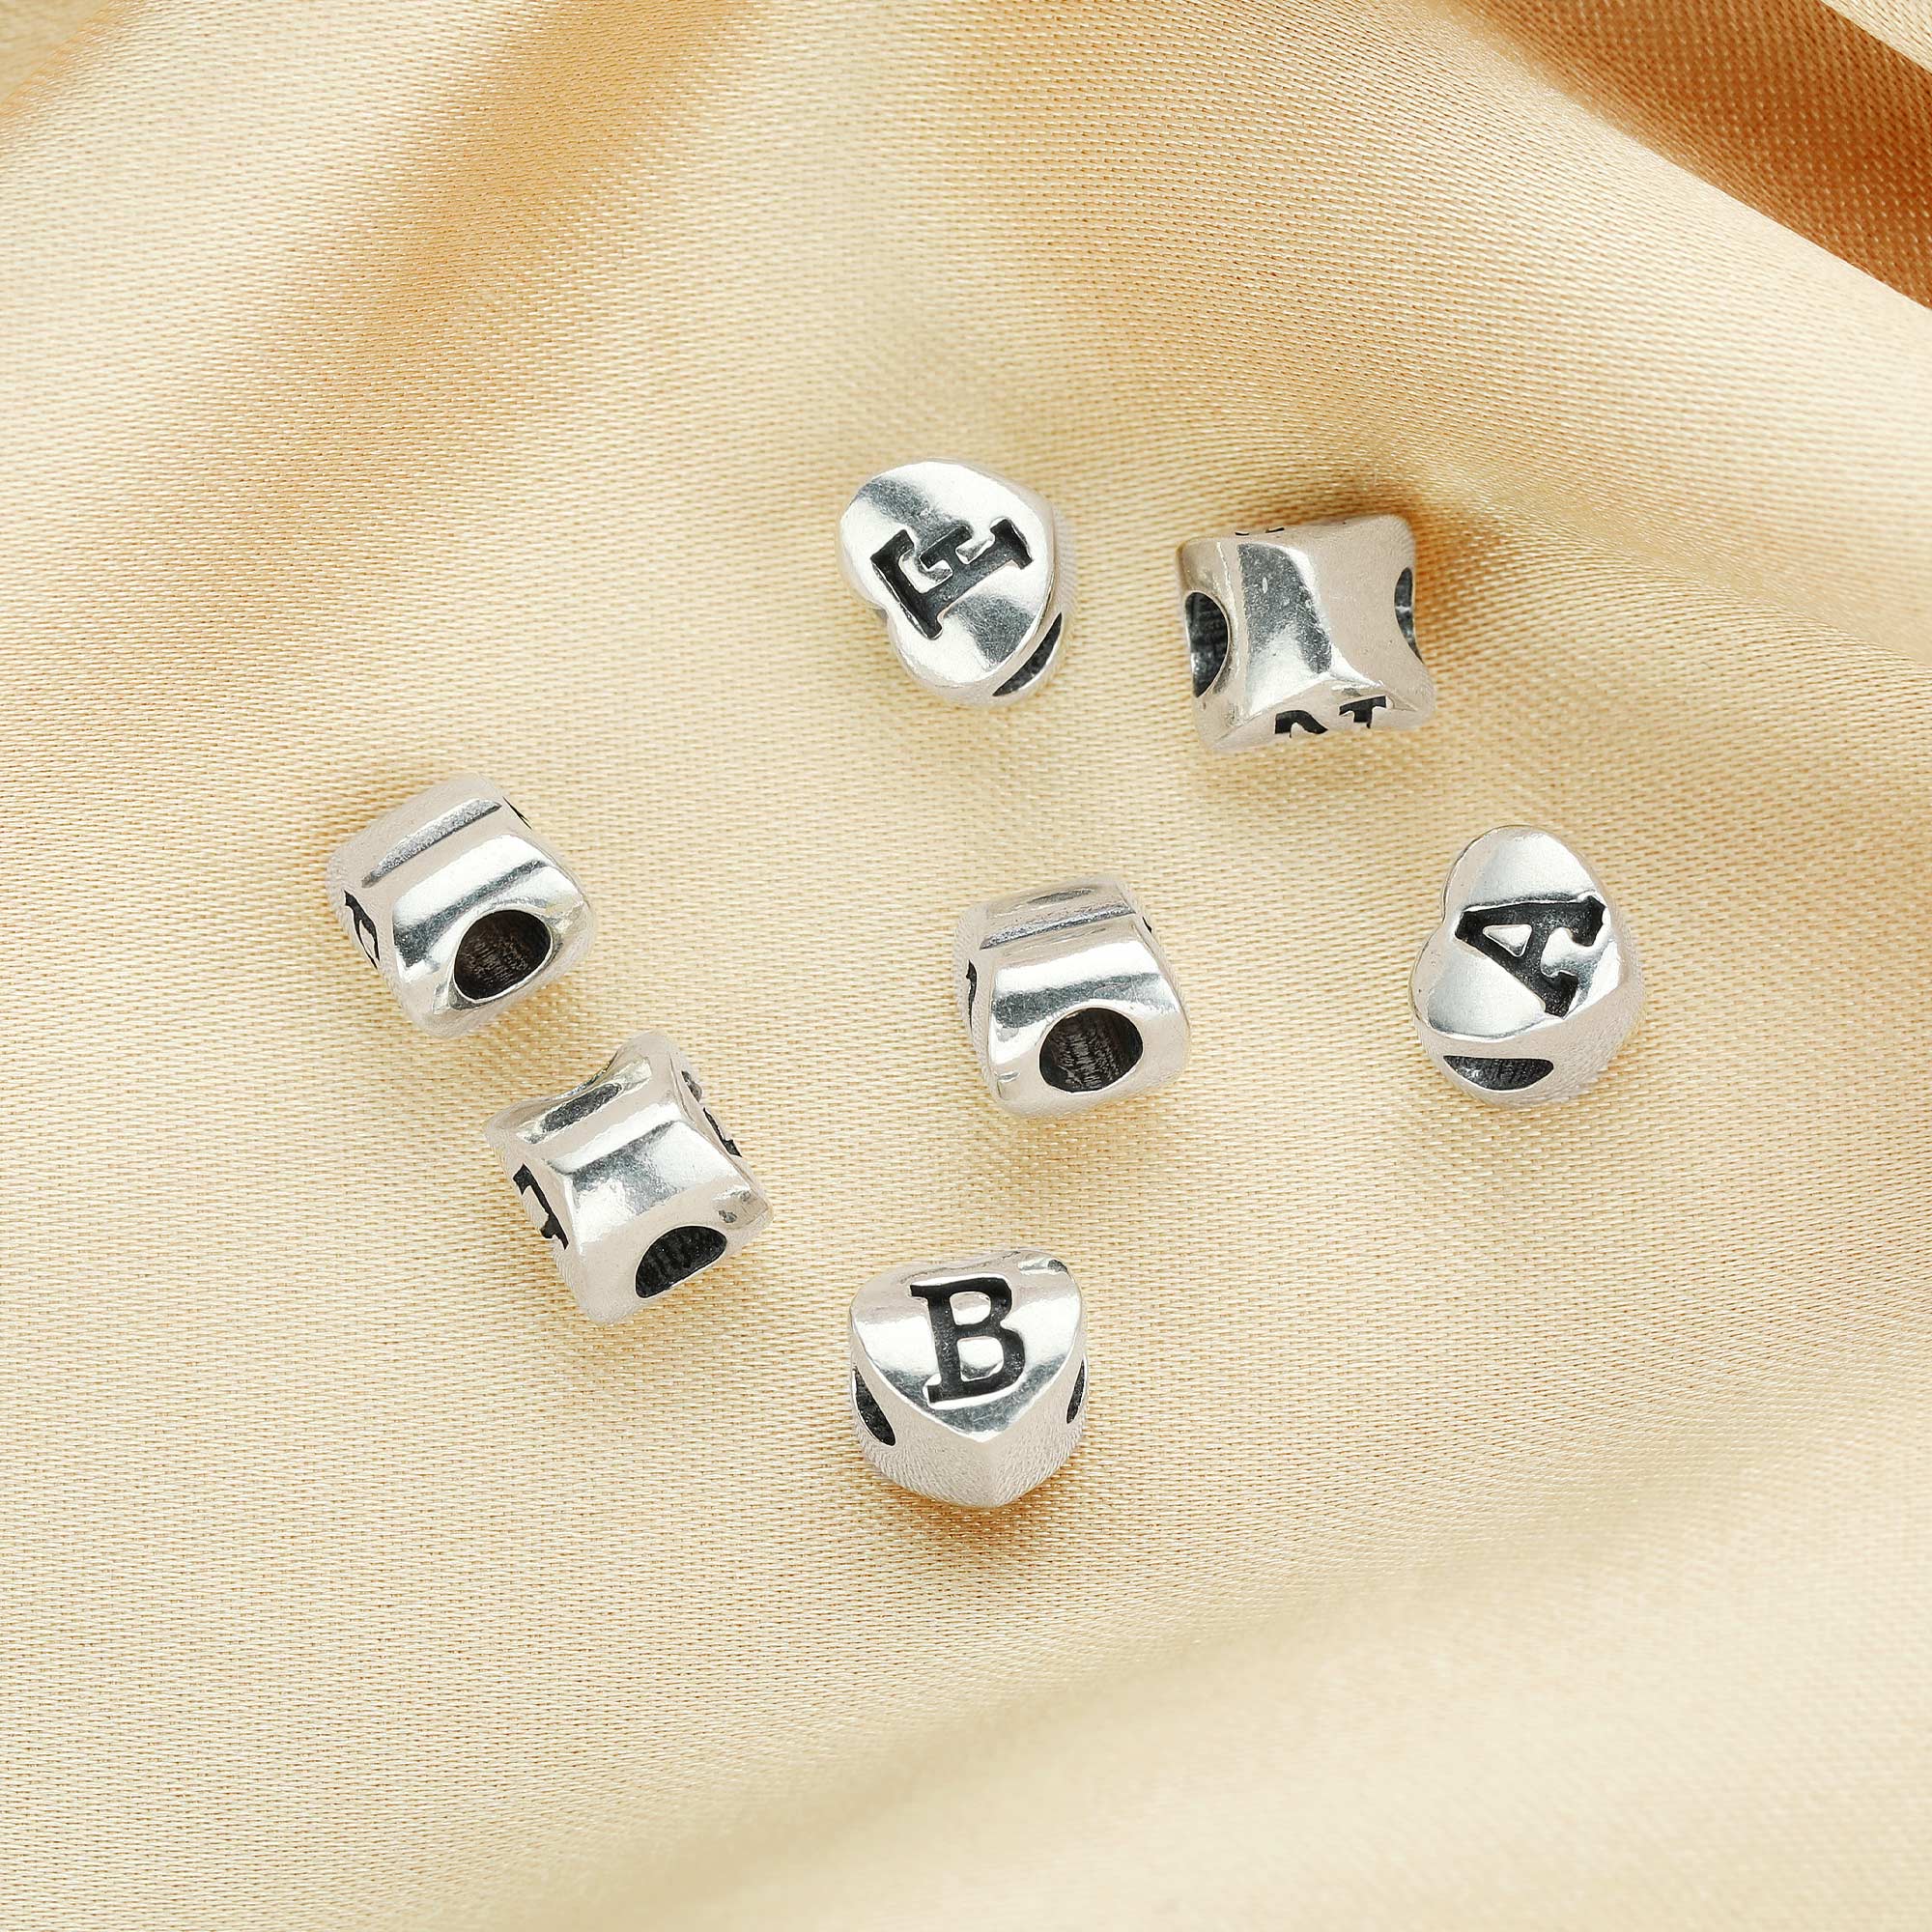 6MM Initial Letter Heart Beads Charm,Alphabet Charm with 2.5MM Hole,Solid 925 Sterling Silver Charm,Hole Bead,DIY Custom Name Charm,DIY Jewelry Making 1431143 - Click Image to Close